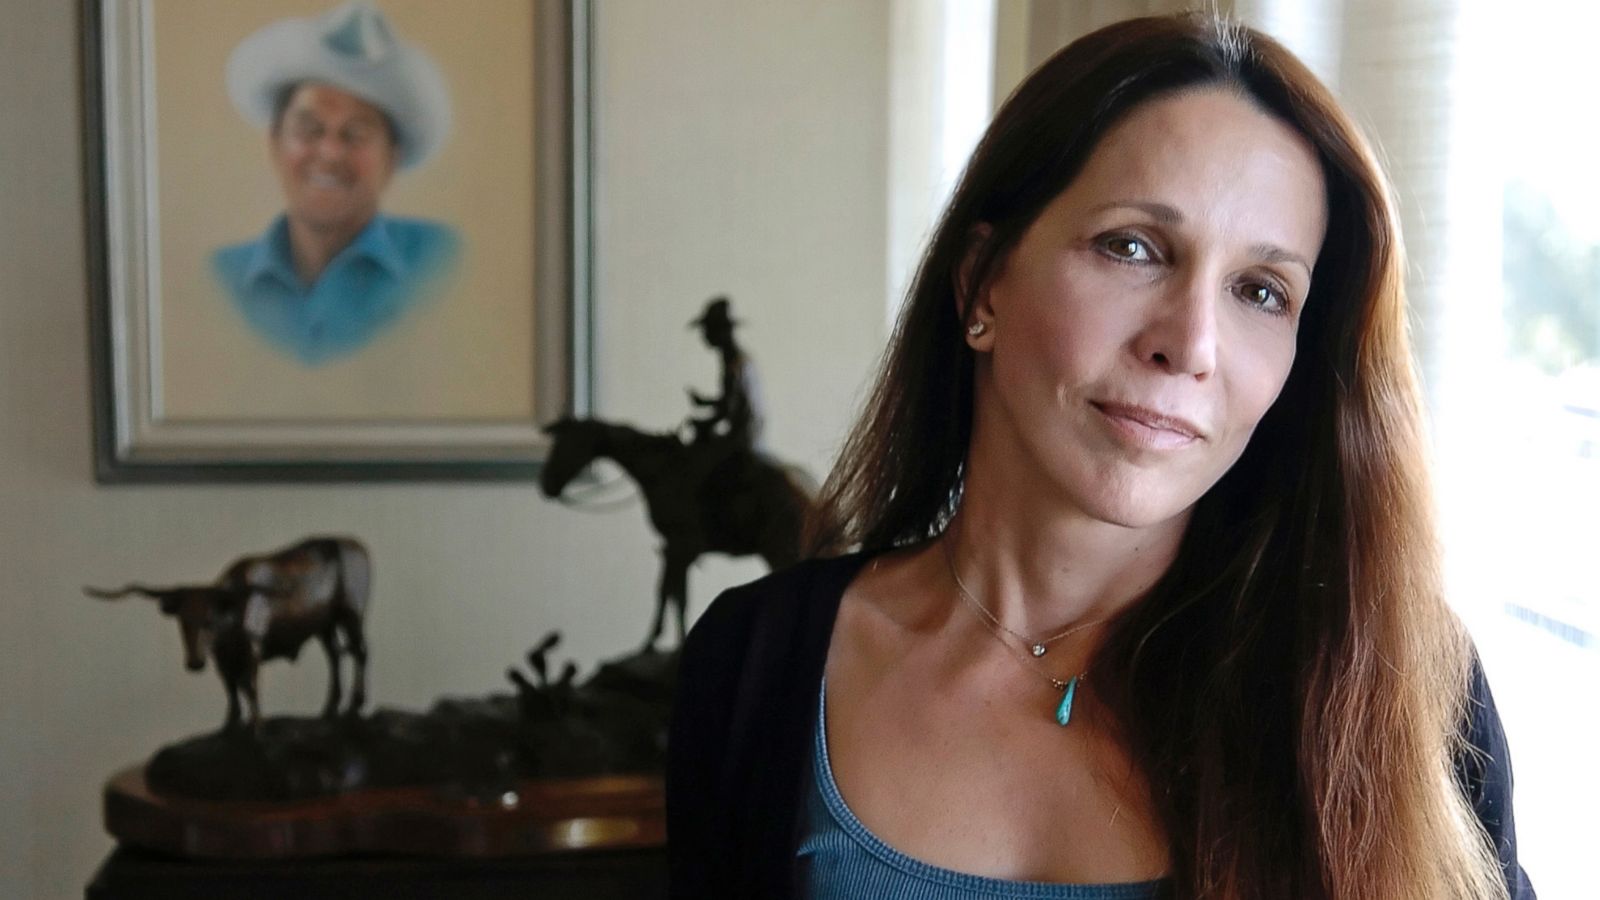 Xxx Raping Bf Full Hd - Ronald Reagan's daughter Patti Davis alleges harrowing sexual assault in  op-ed supporting Kavanaugh accuser - ABC News